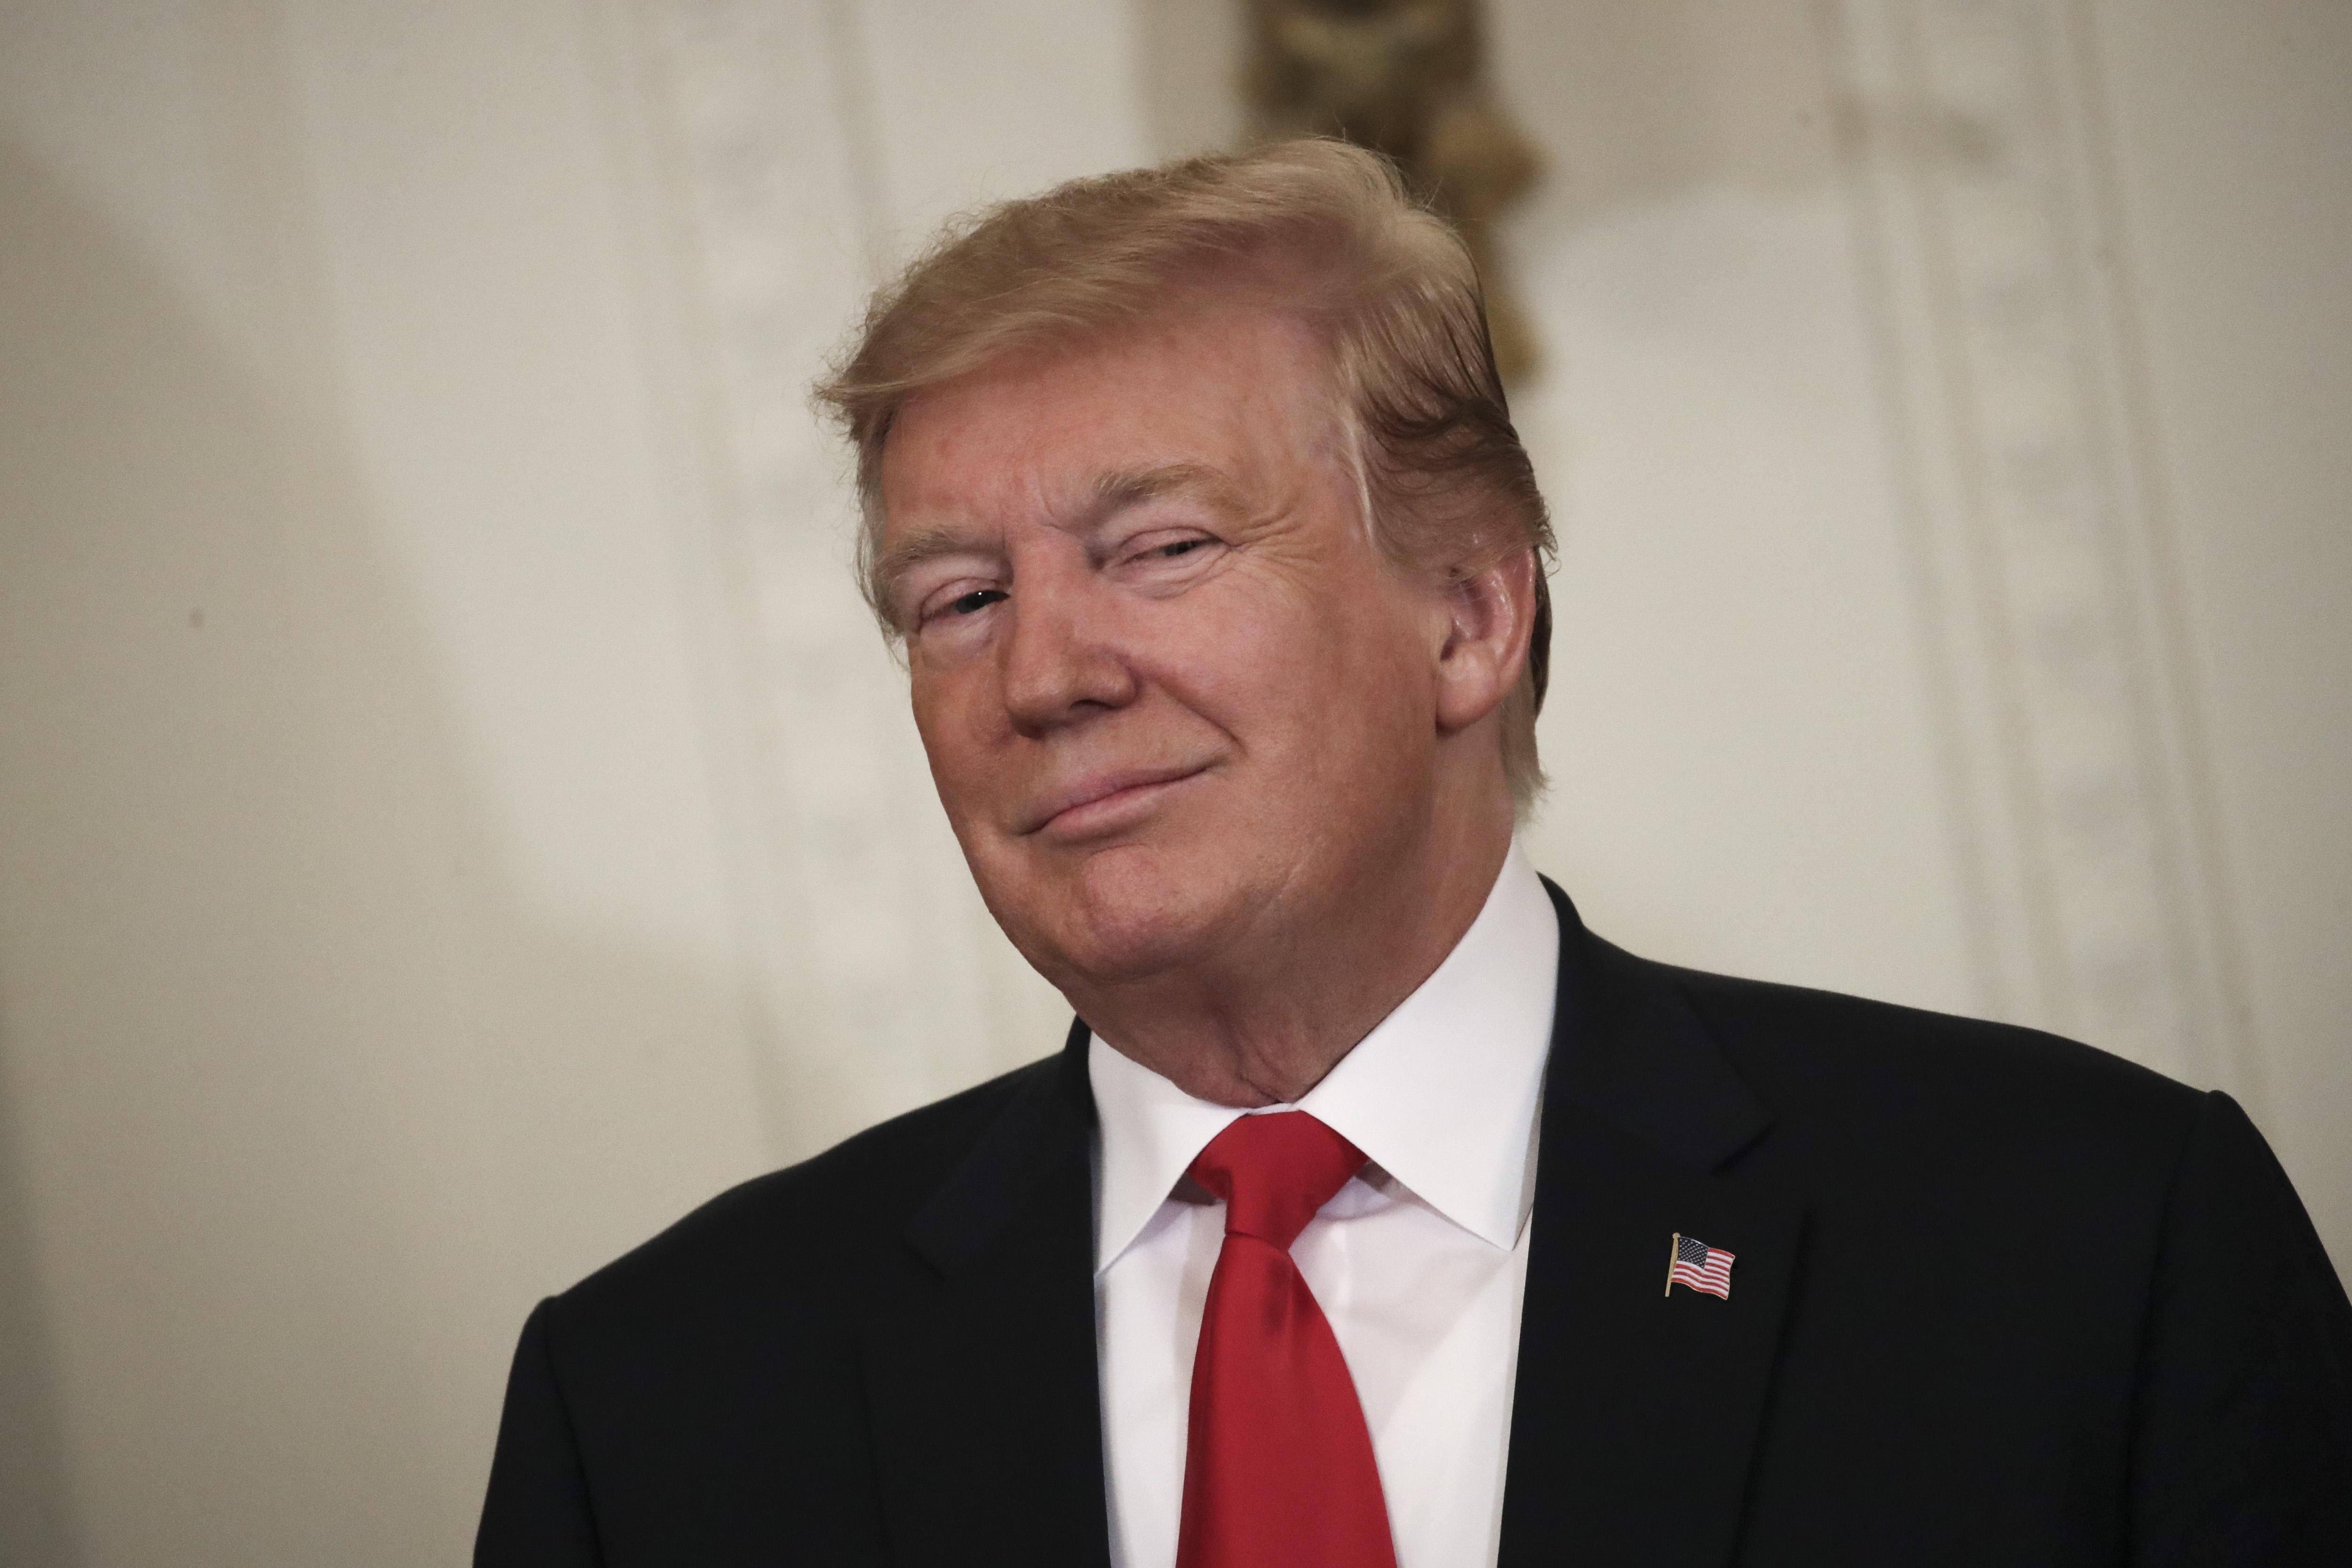 President Donald Trump during an event in the East Room of the White House, April 18, 2019 in Washington, DC. 